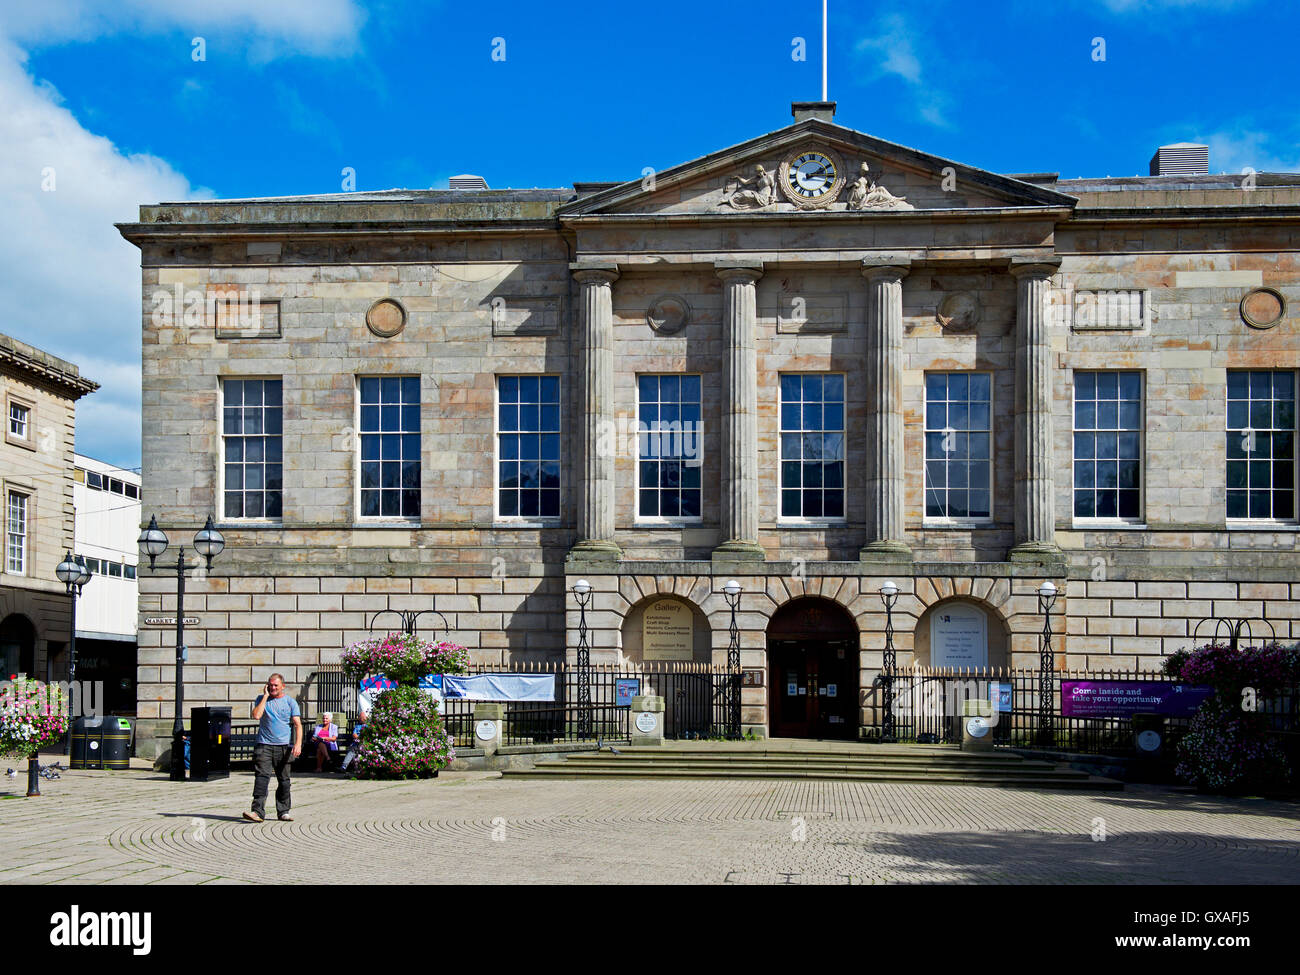 Shire Hall, Stafford, Staffordshire, Angleterre, Royaume-Uni Banque D'Images